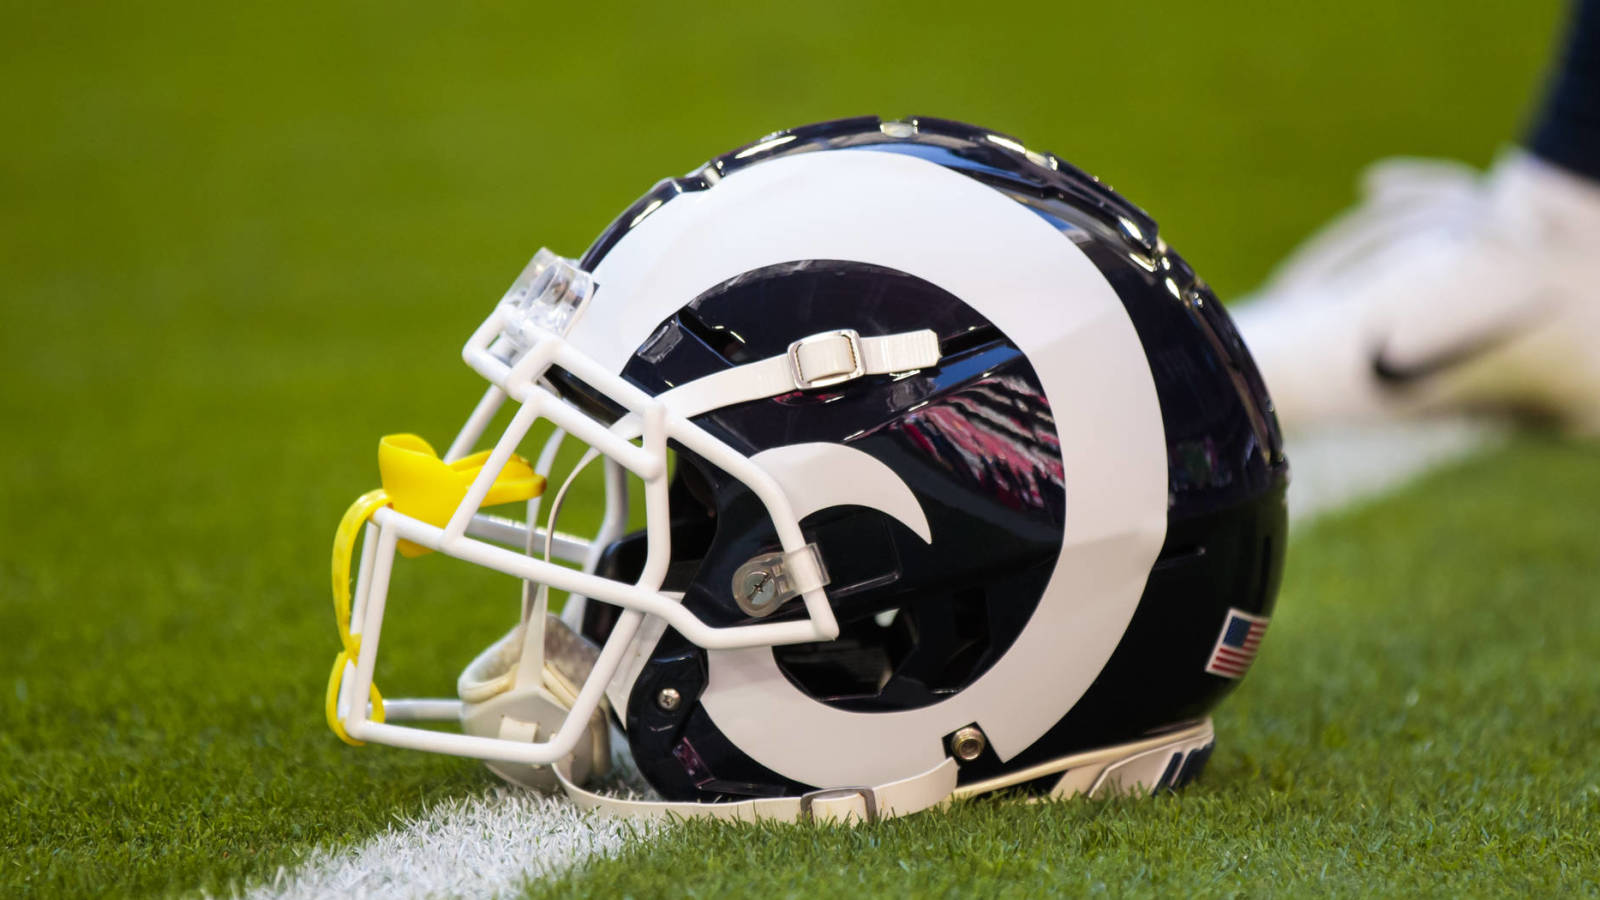 Live Los Angeles Rams vs Green Bay Packers Online | Los Angeles Rams vs Green Bay Packers Stream Link 7